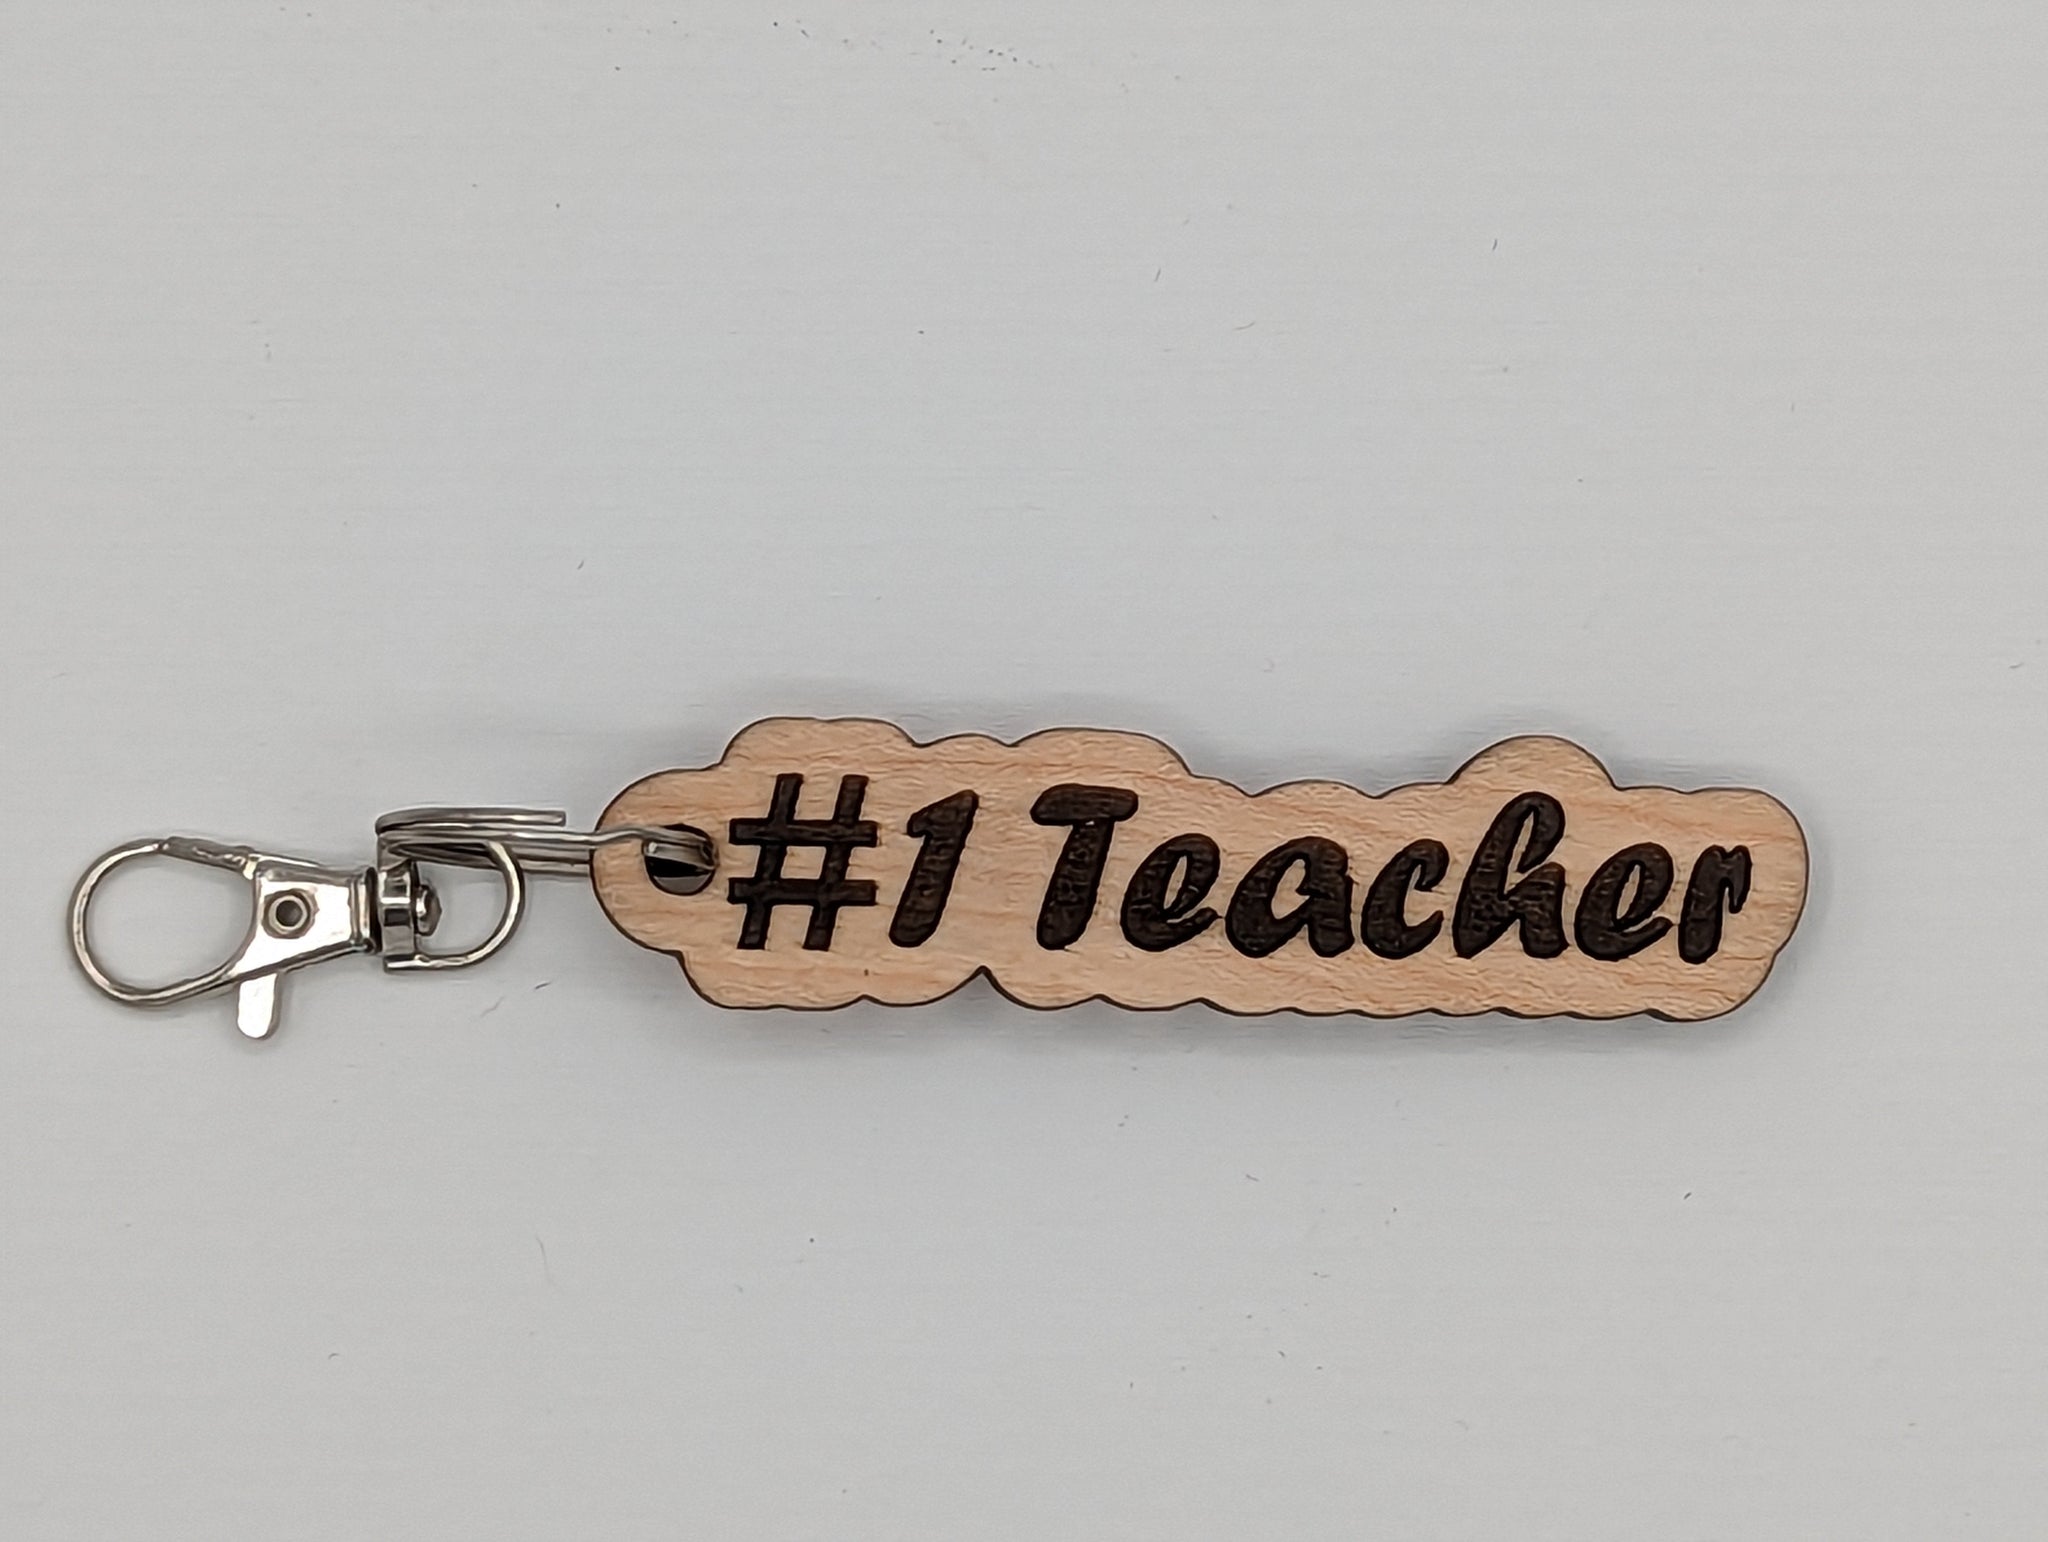 # 1 Teacher - Wooden Keychain with Metal Clasp